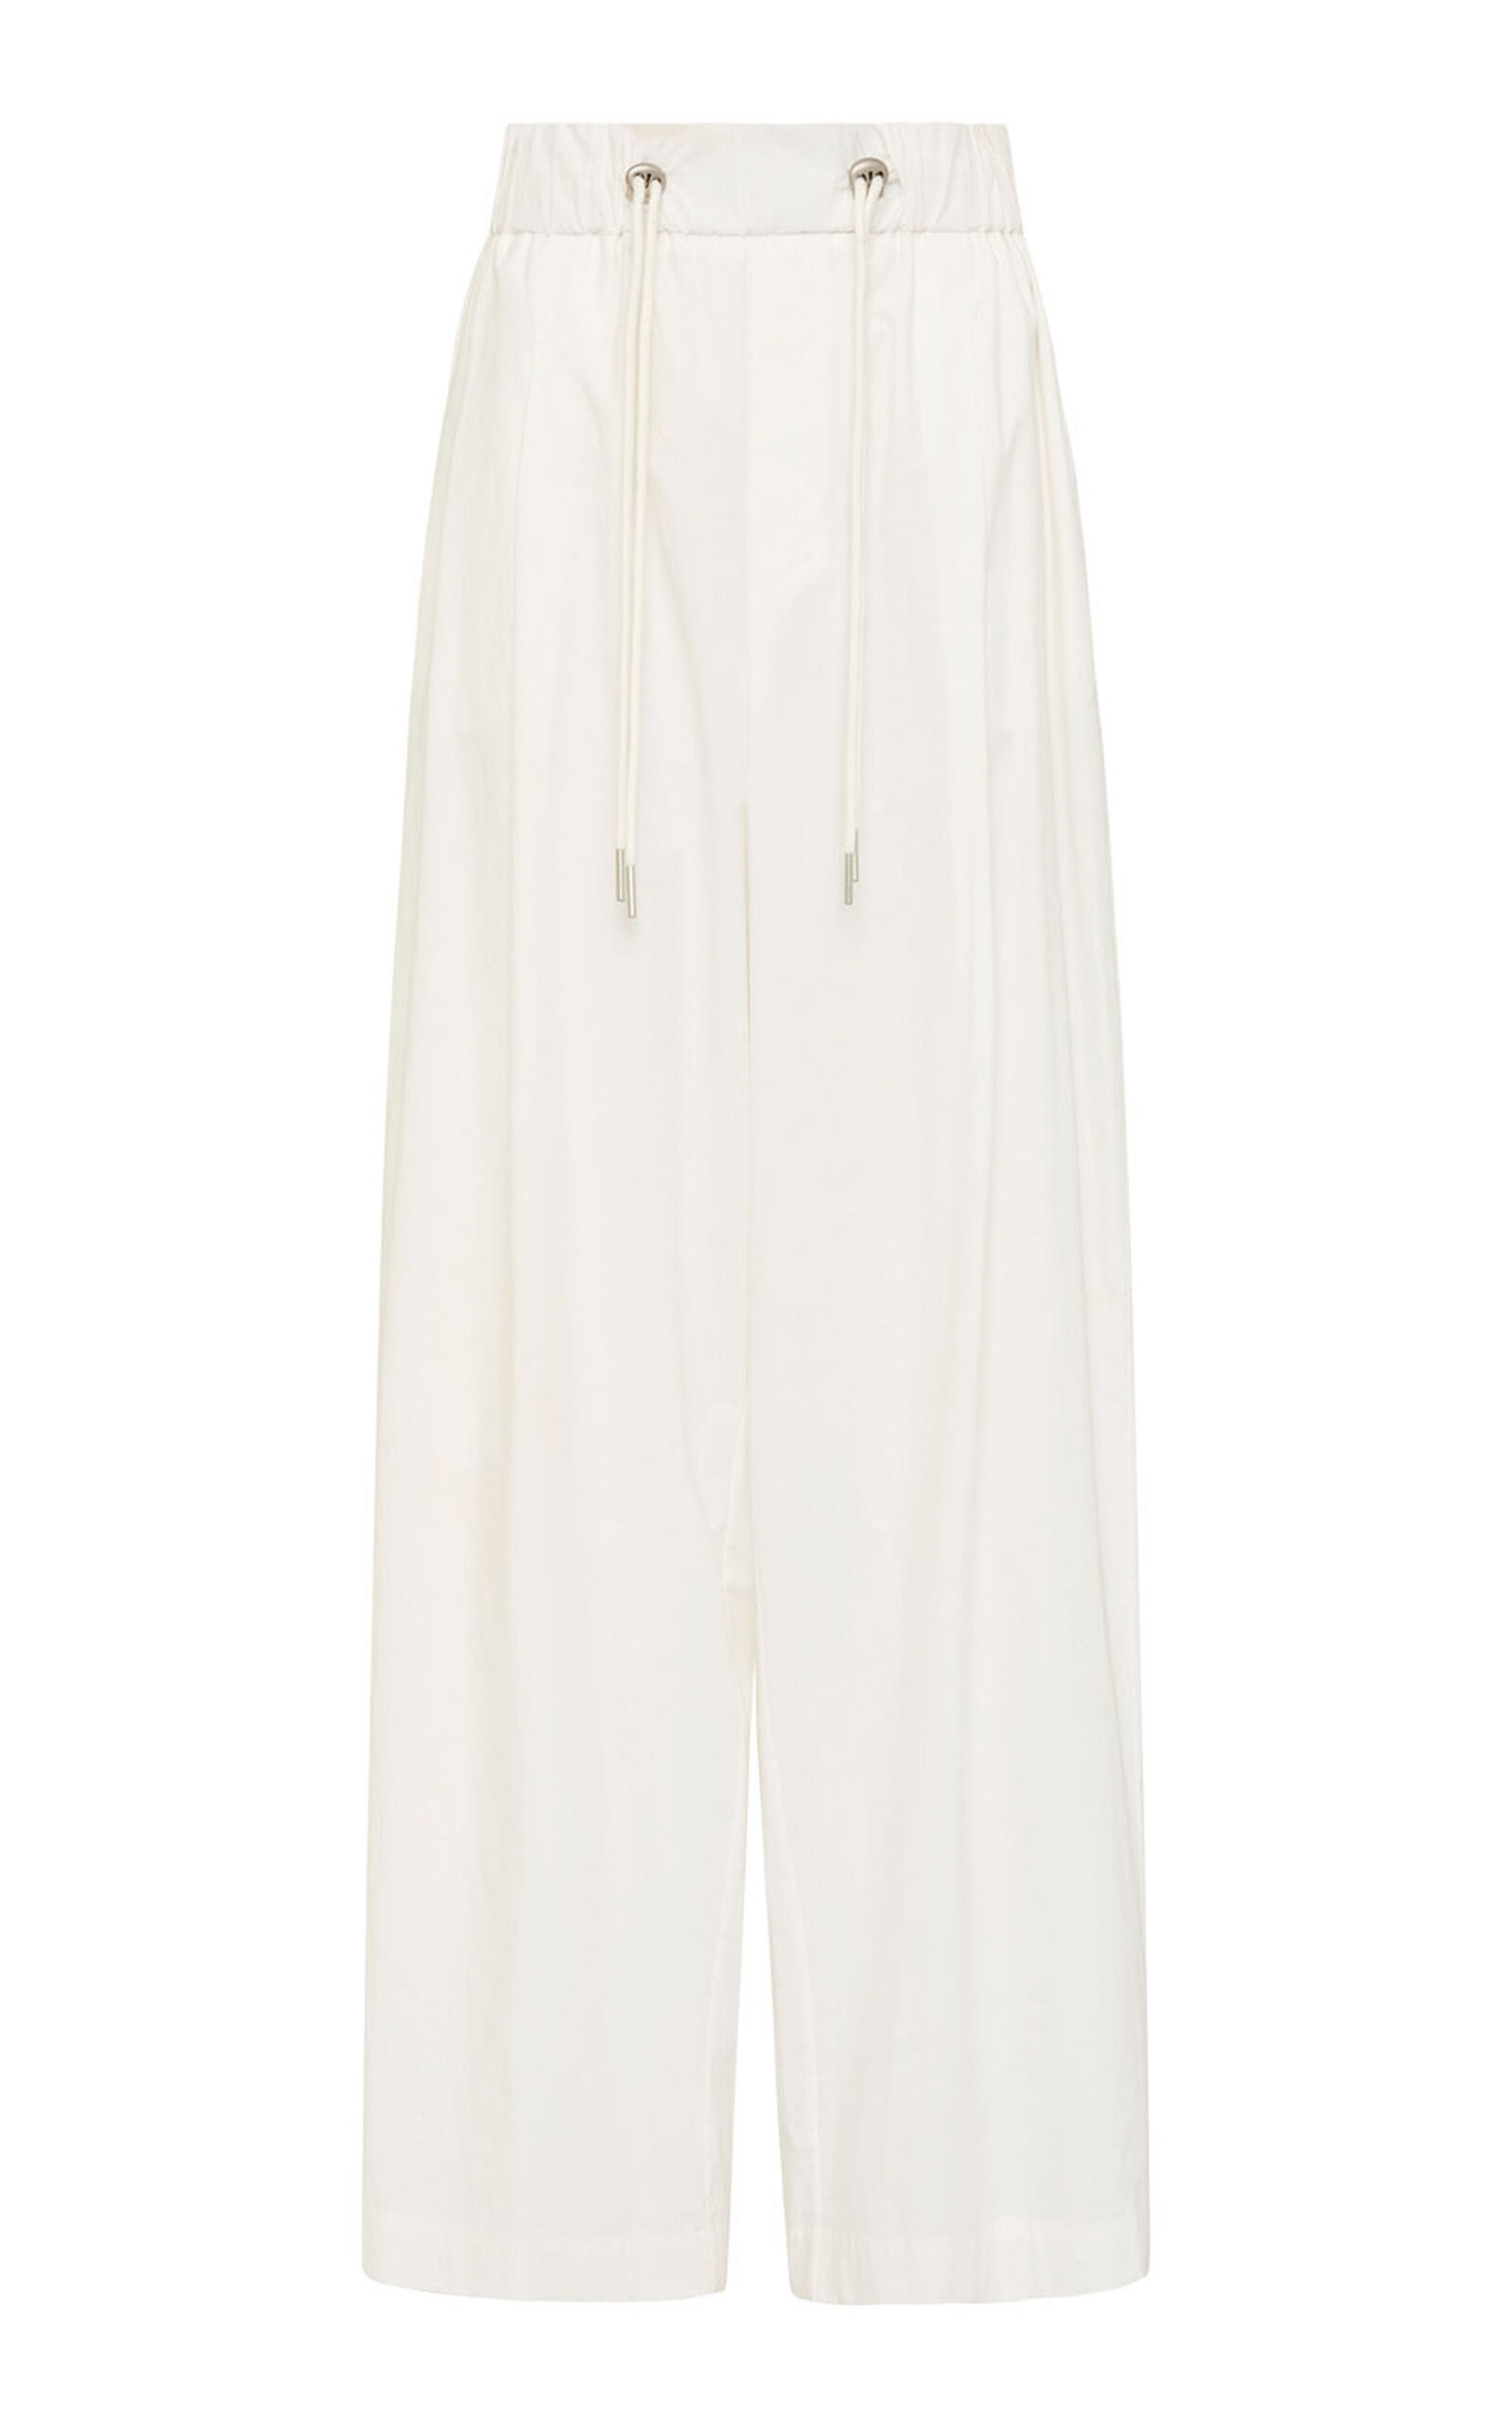 St Agni Relaxed Drawstring Cotton Pants In White